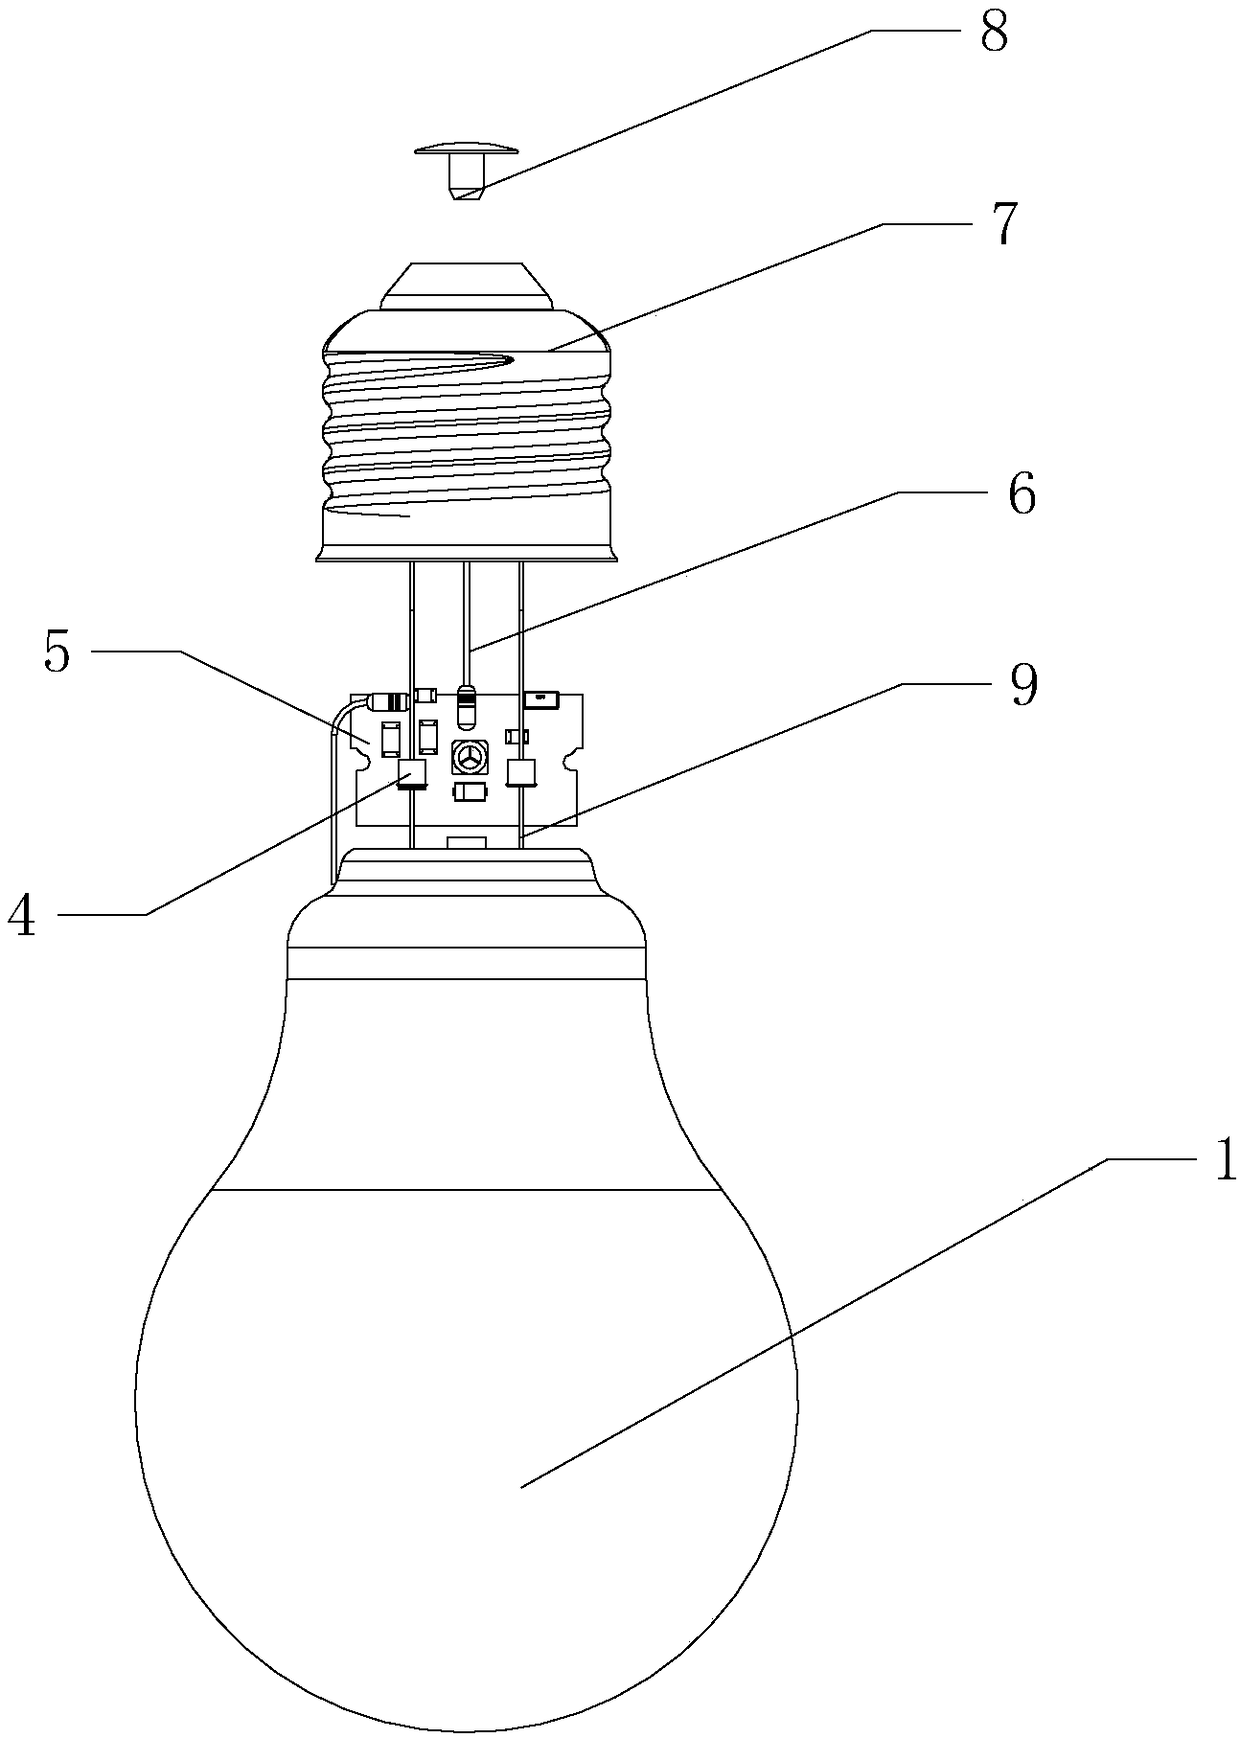 Automatic assembling technology for LED filament lamp